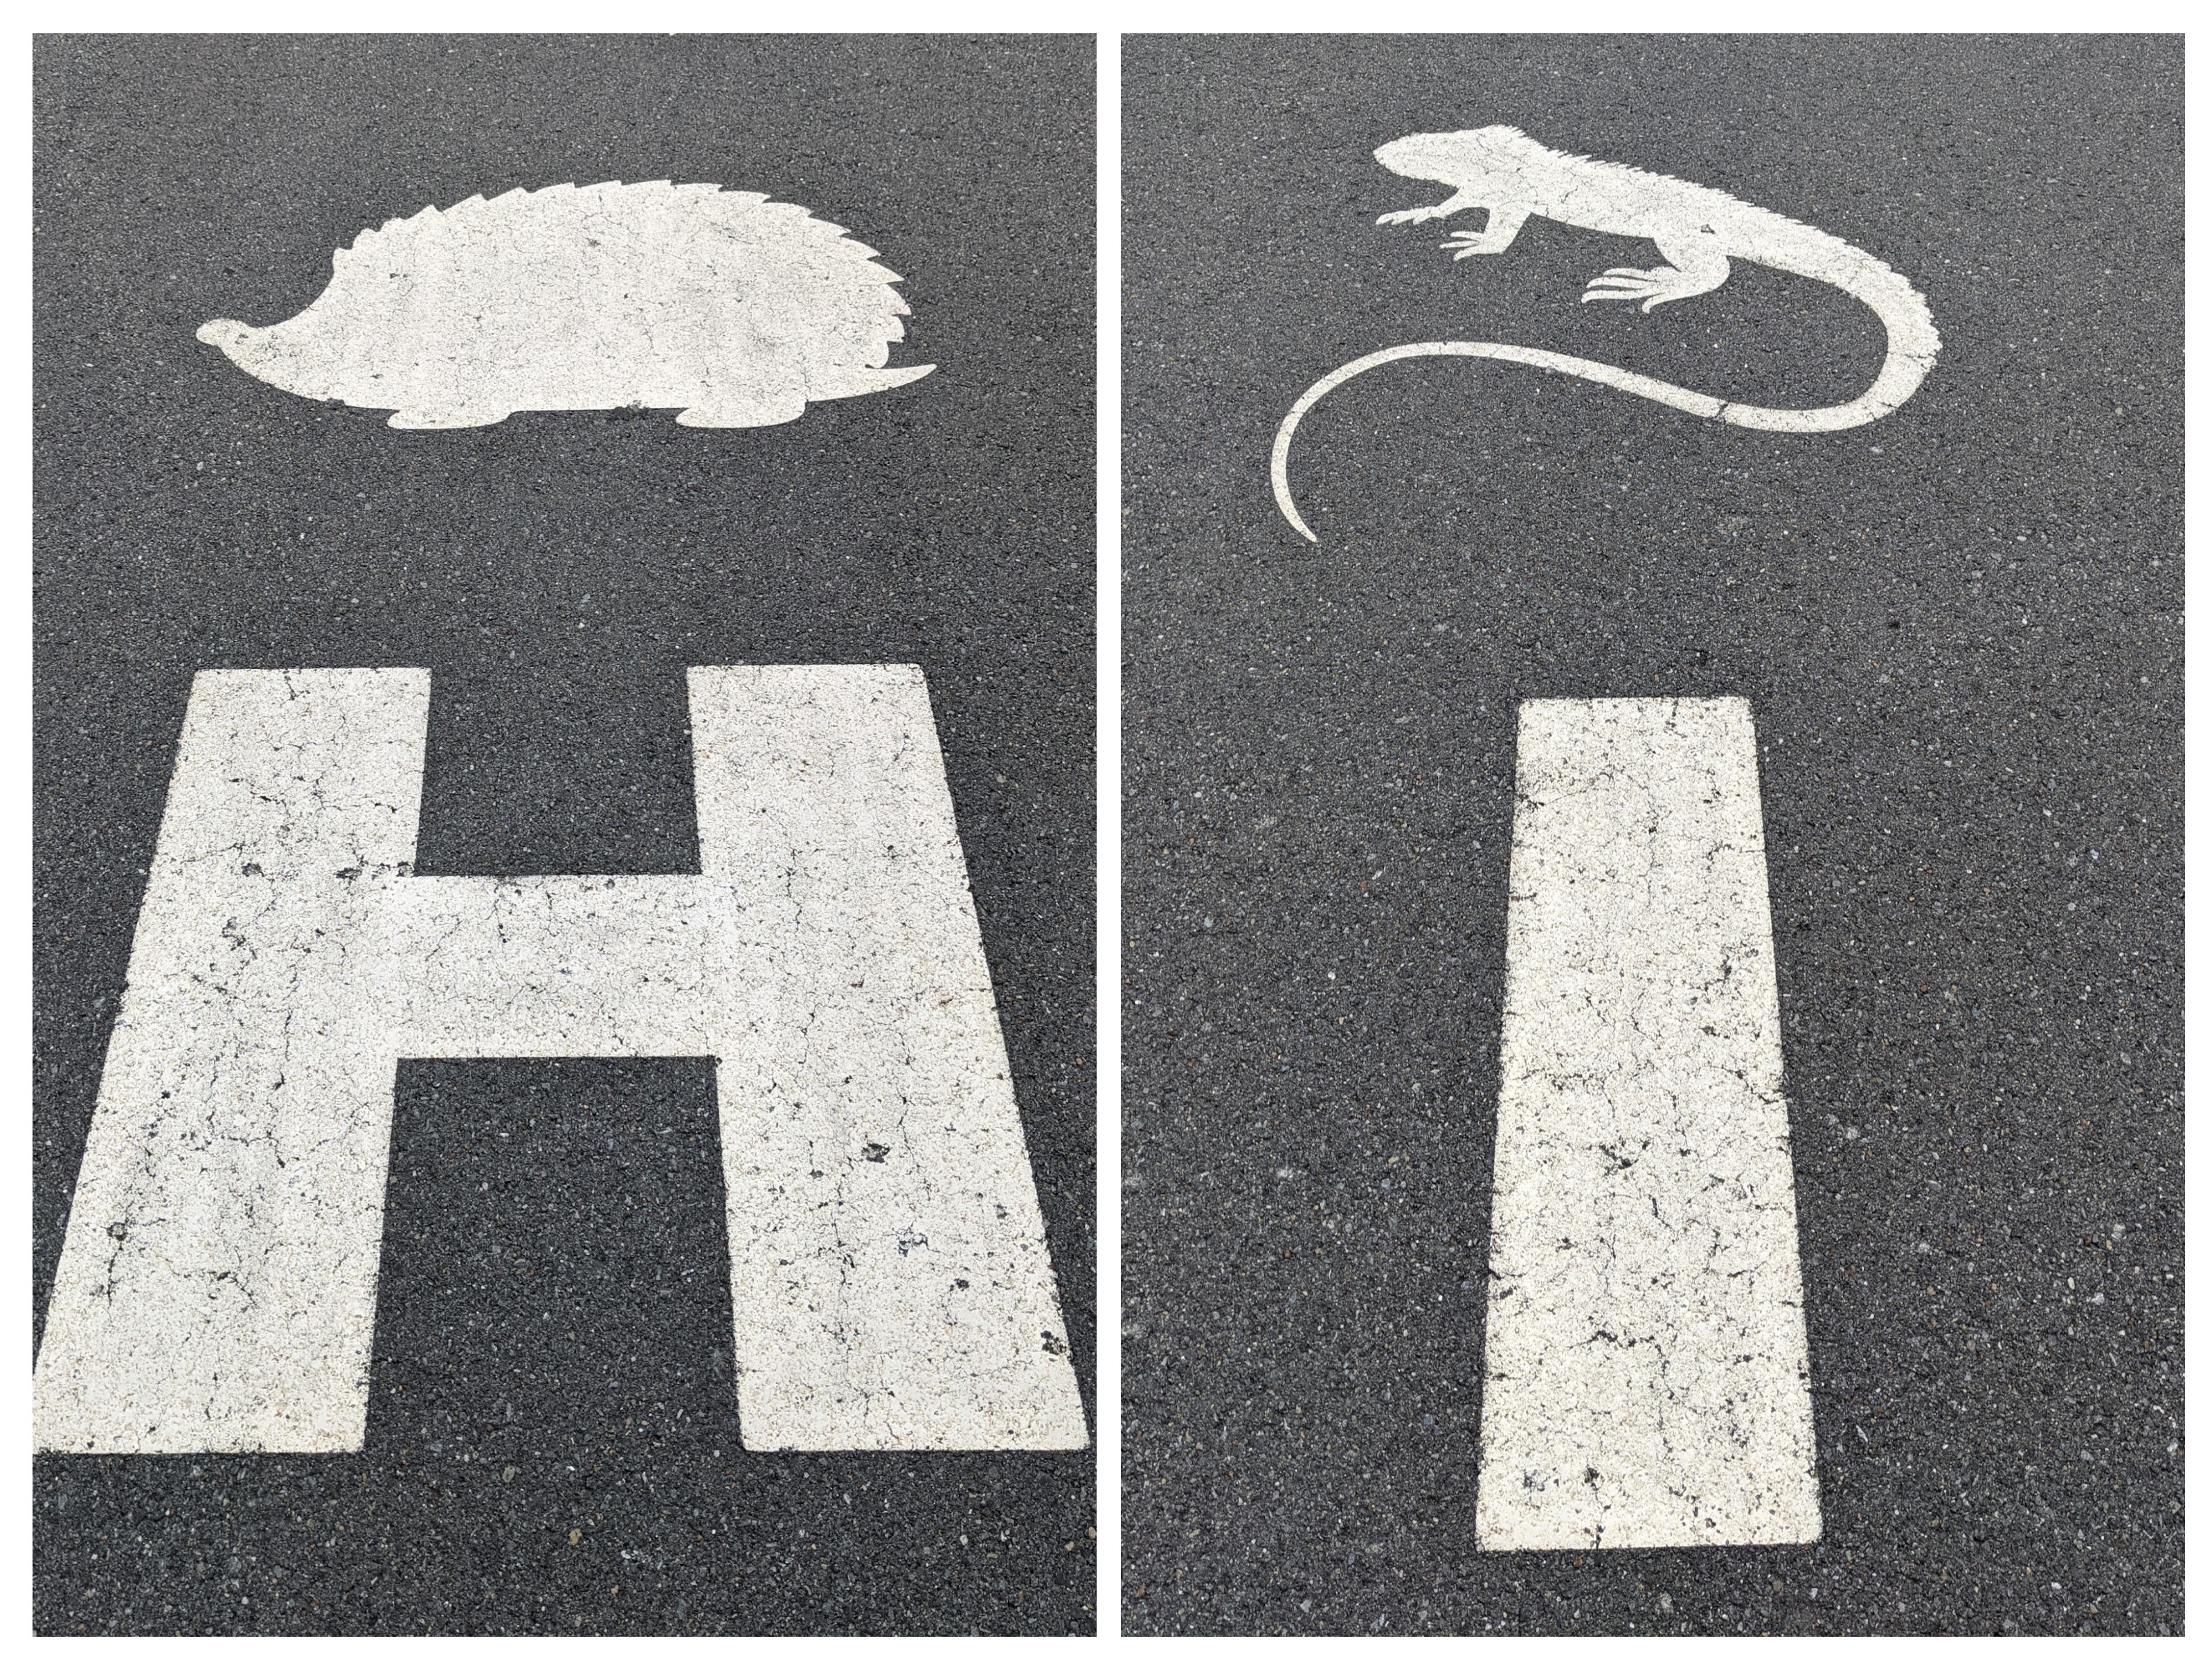 Collage of 'H' and 'I' car parking row sign with appropriate animal symbols